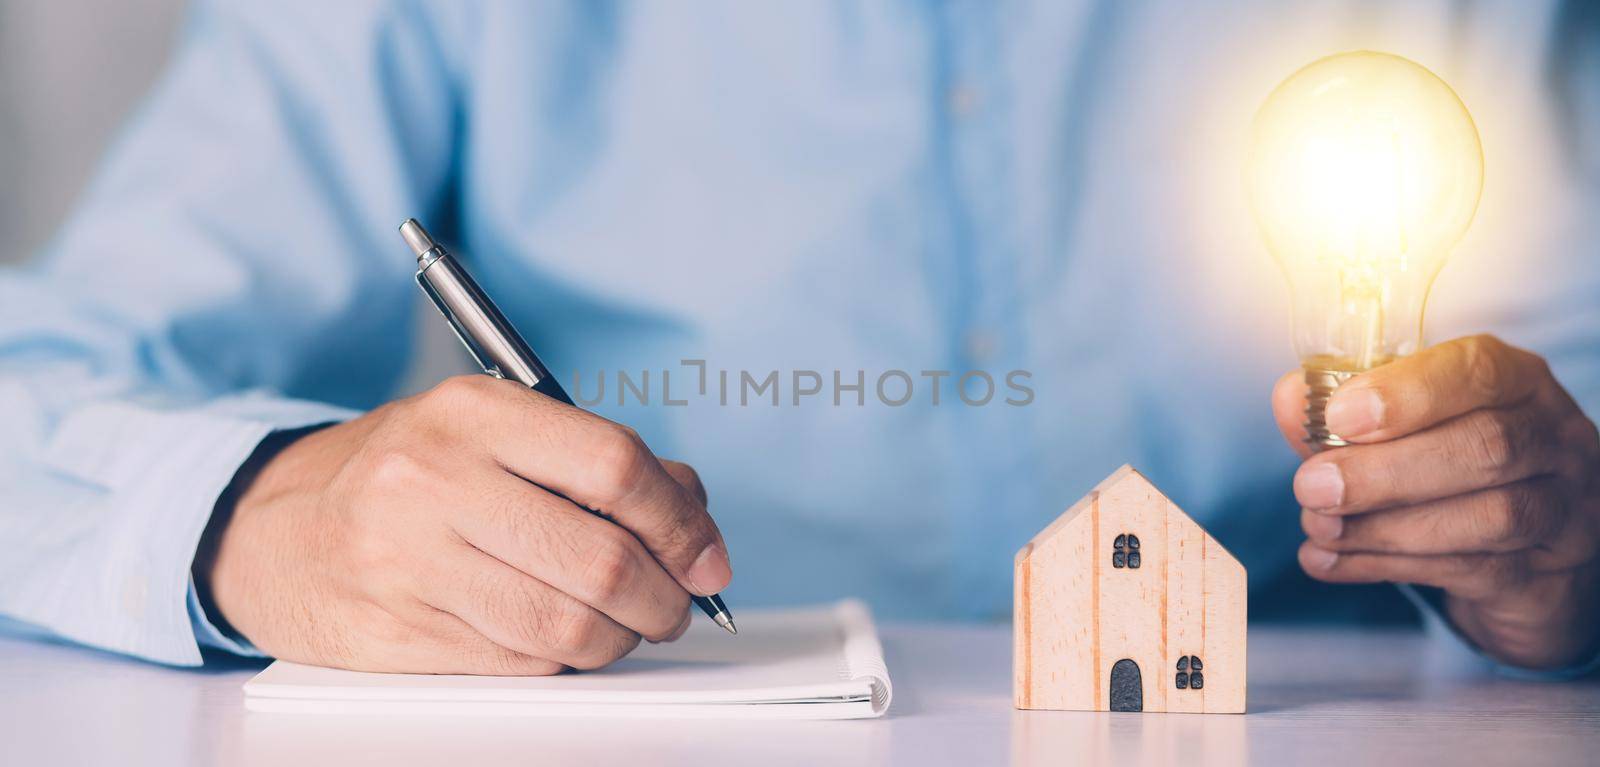 Businessman holding light bulb while home wooden for solution innovation and environment, thinking idea for planning buy house, residential with eco and saving energy, business and finance concept.